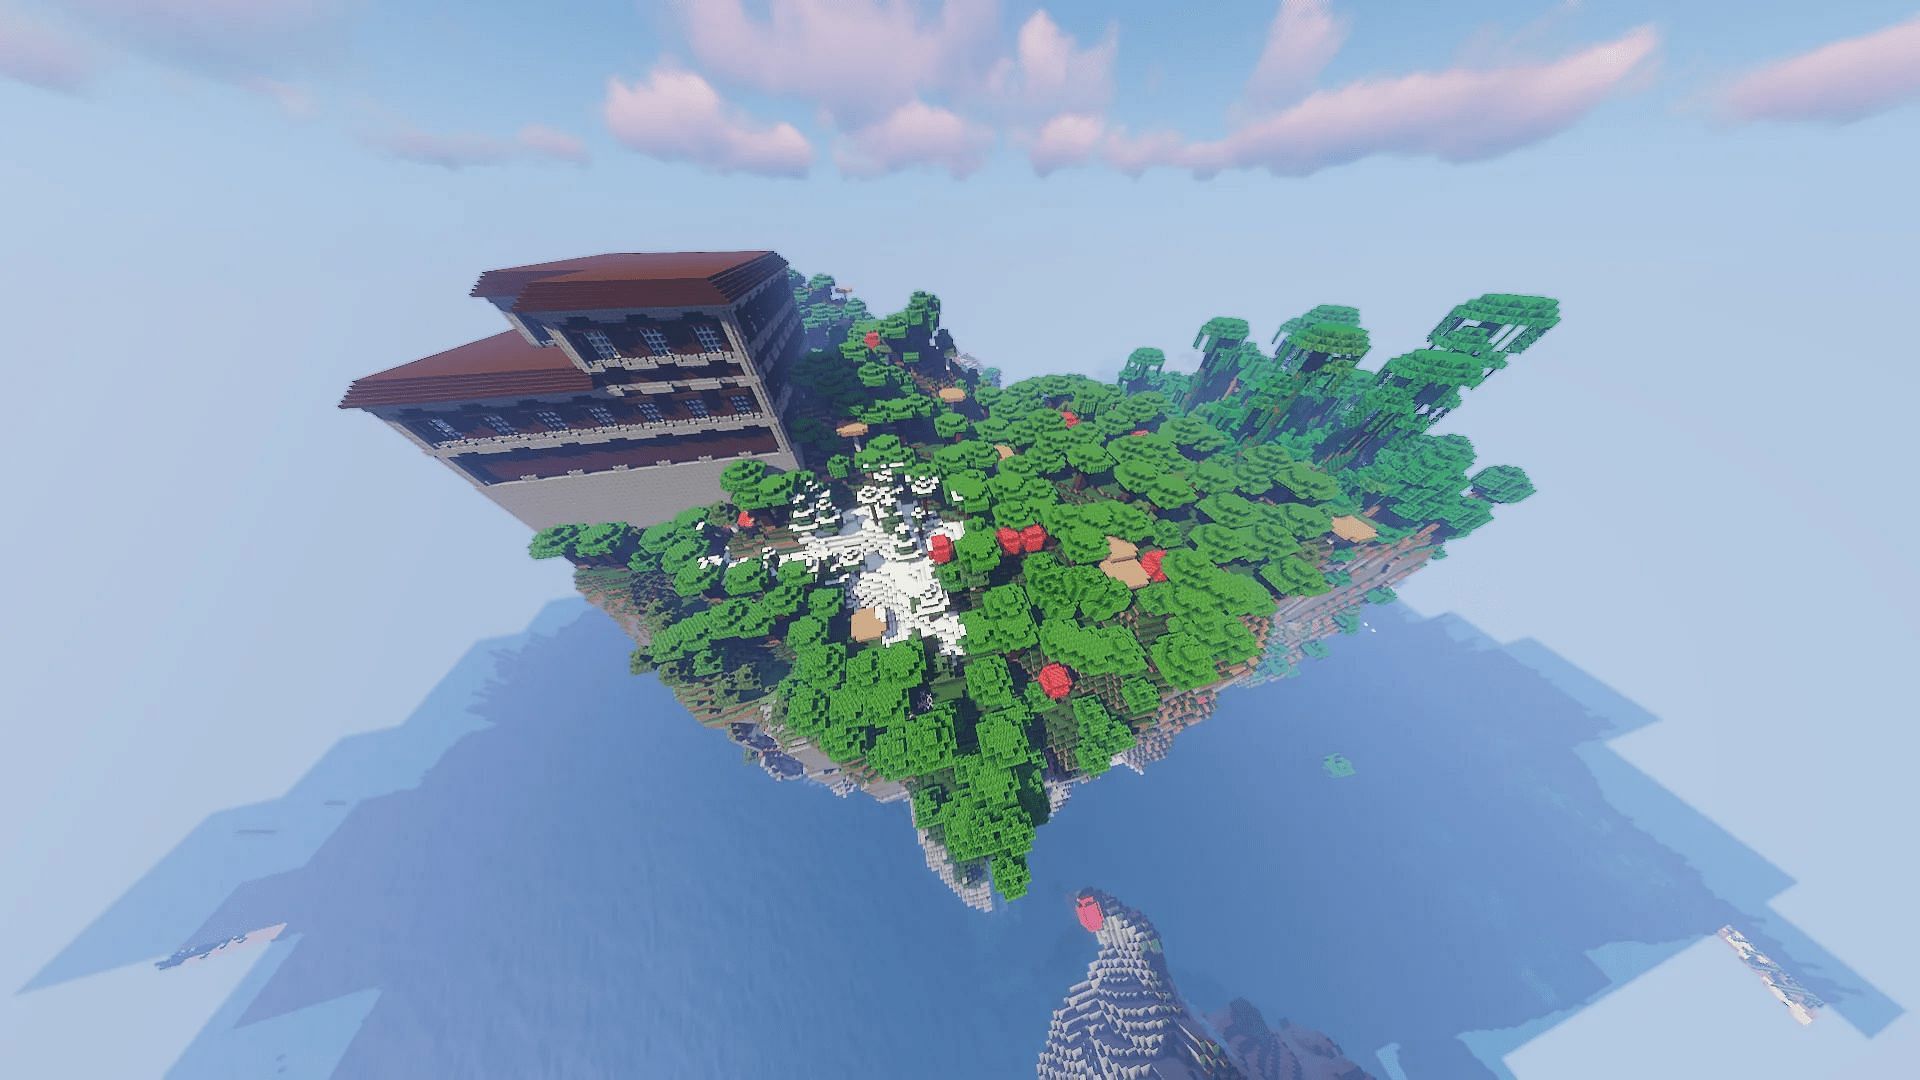 The cliff-like island in this Minecraft seed has multiple structures to check out (Image via MZEEN1367/Reddit)